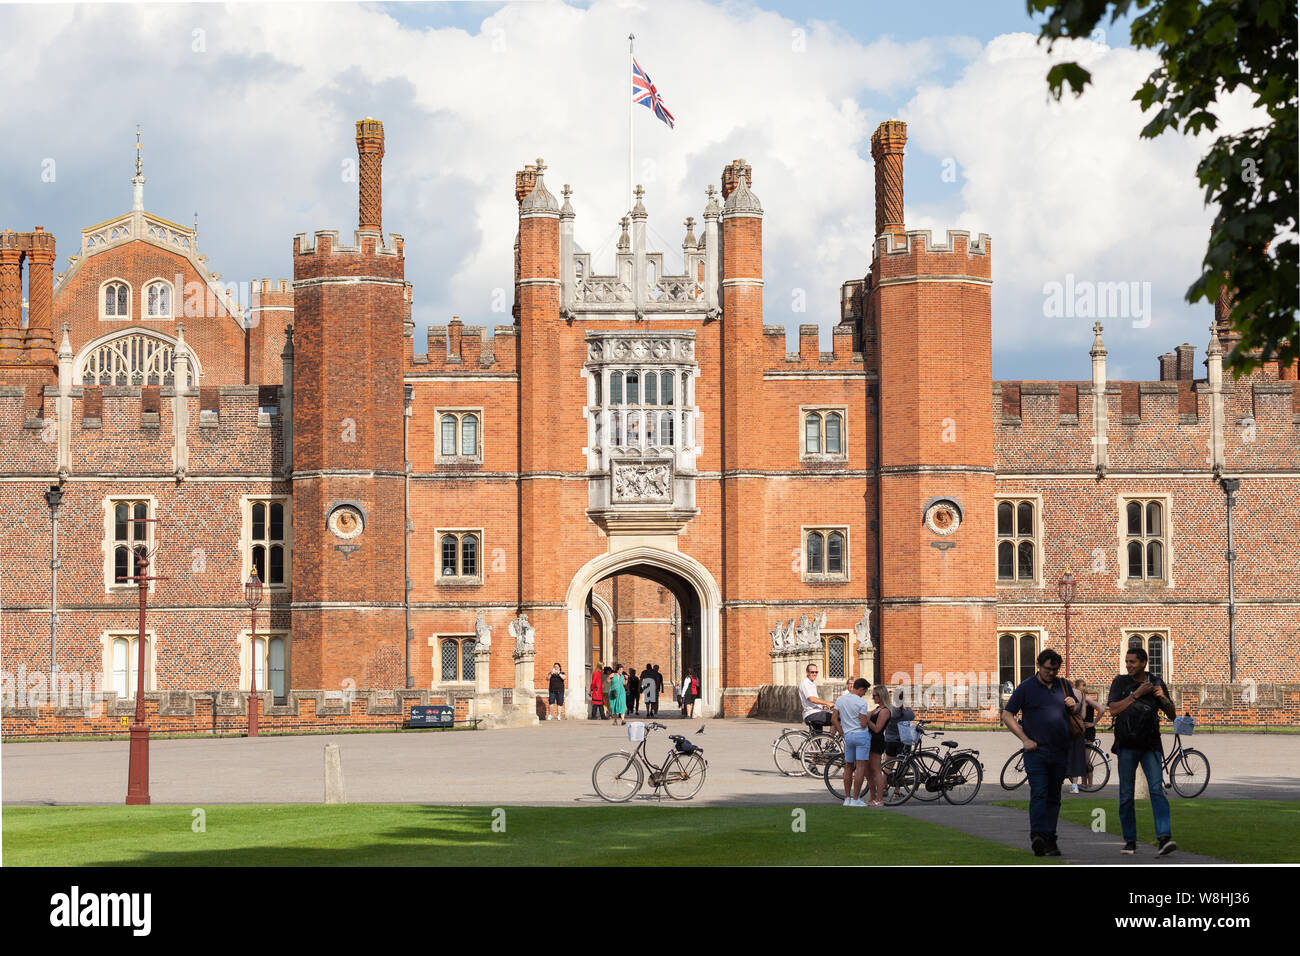 The West Front and Main Entrance to Hampton Court Palace, Richmond upon Thames, London, England, UK. Stock Photo